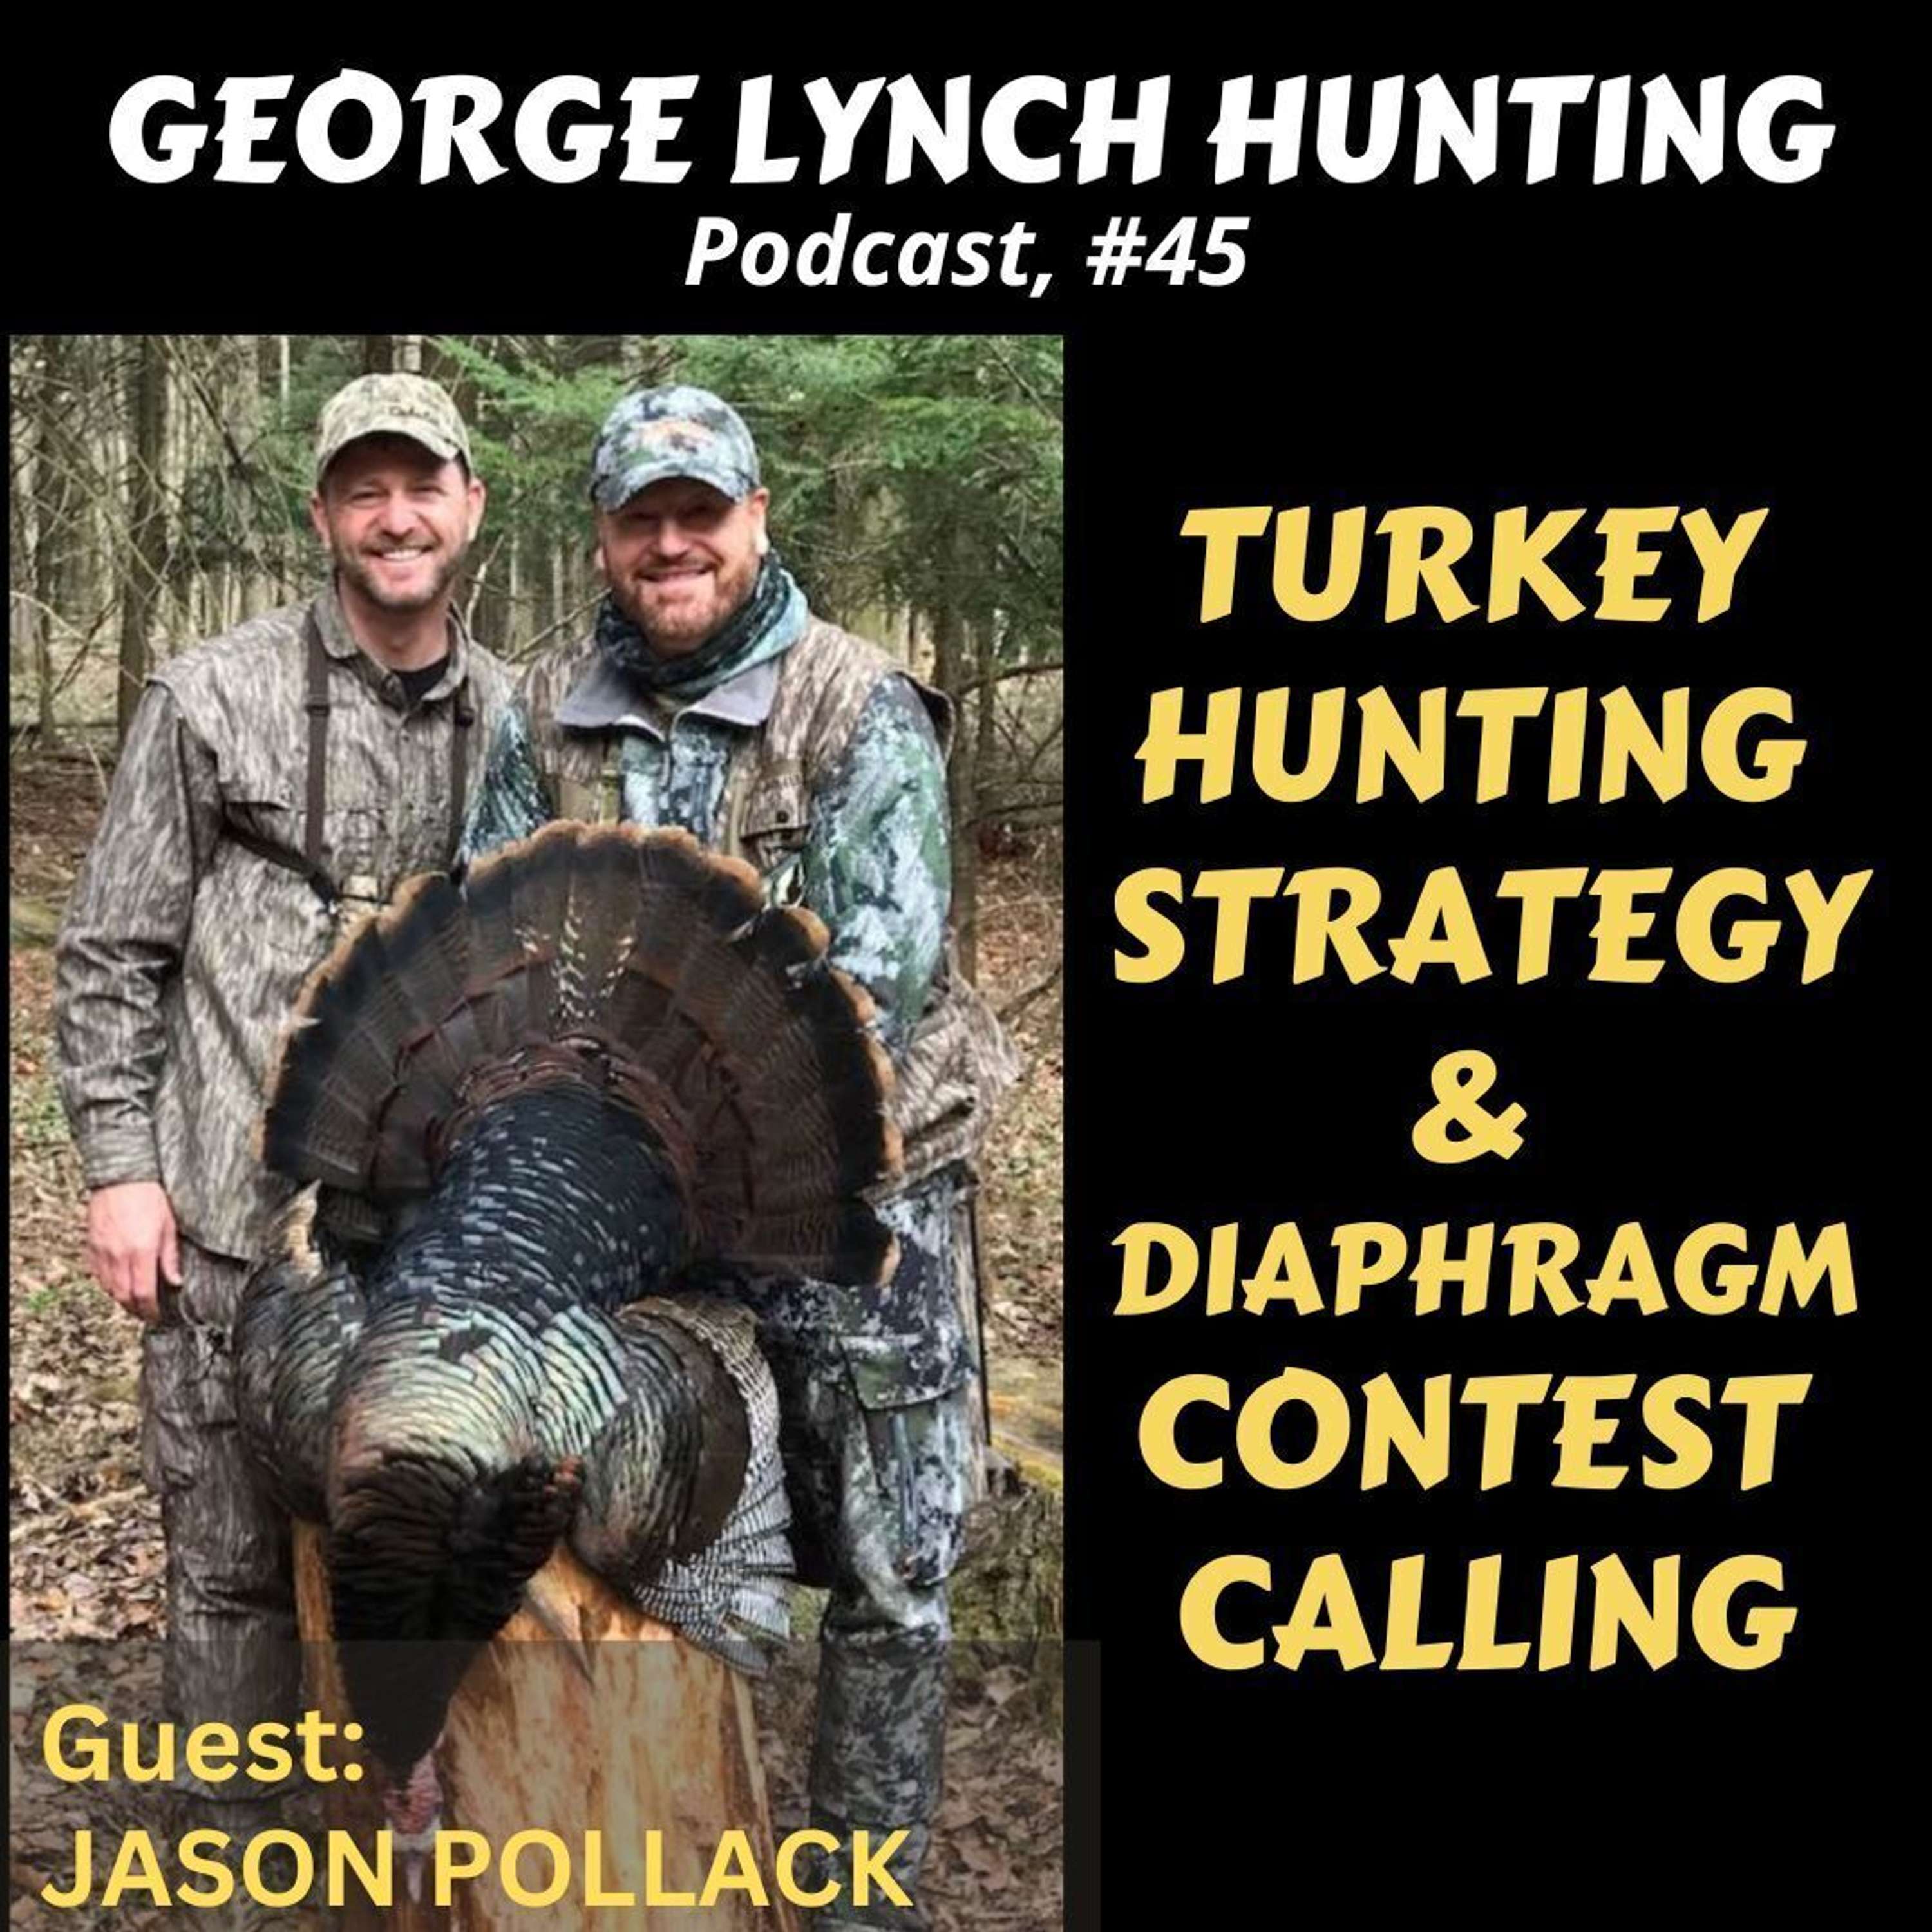 TURKEY HUNTING STRATEGY AND CONTEST CALLING with JASON POLLACK